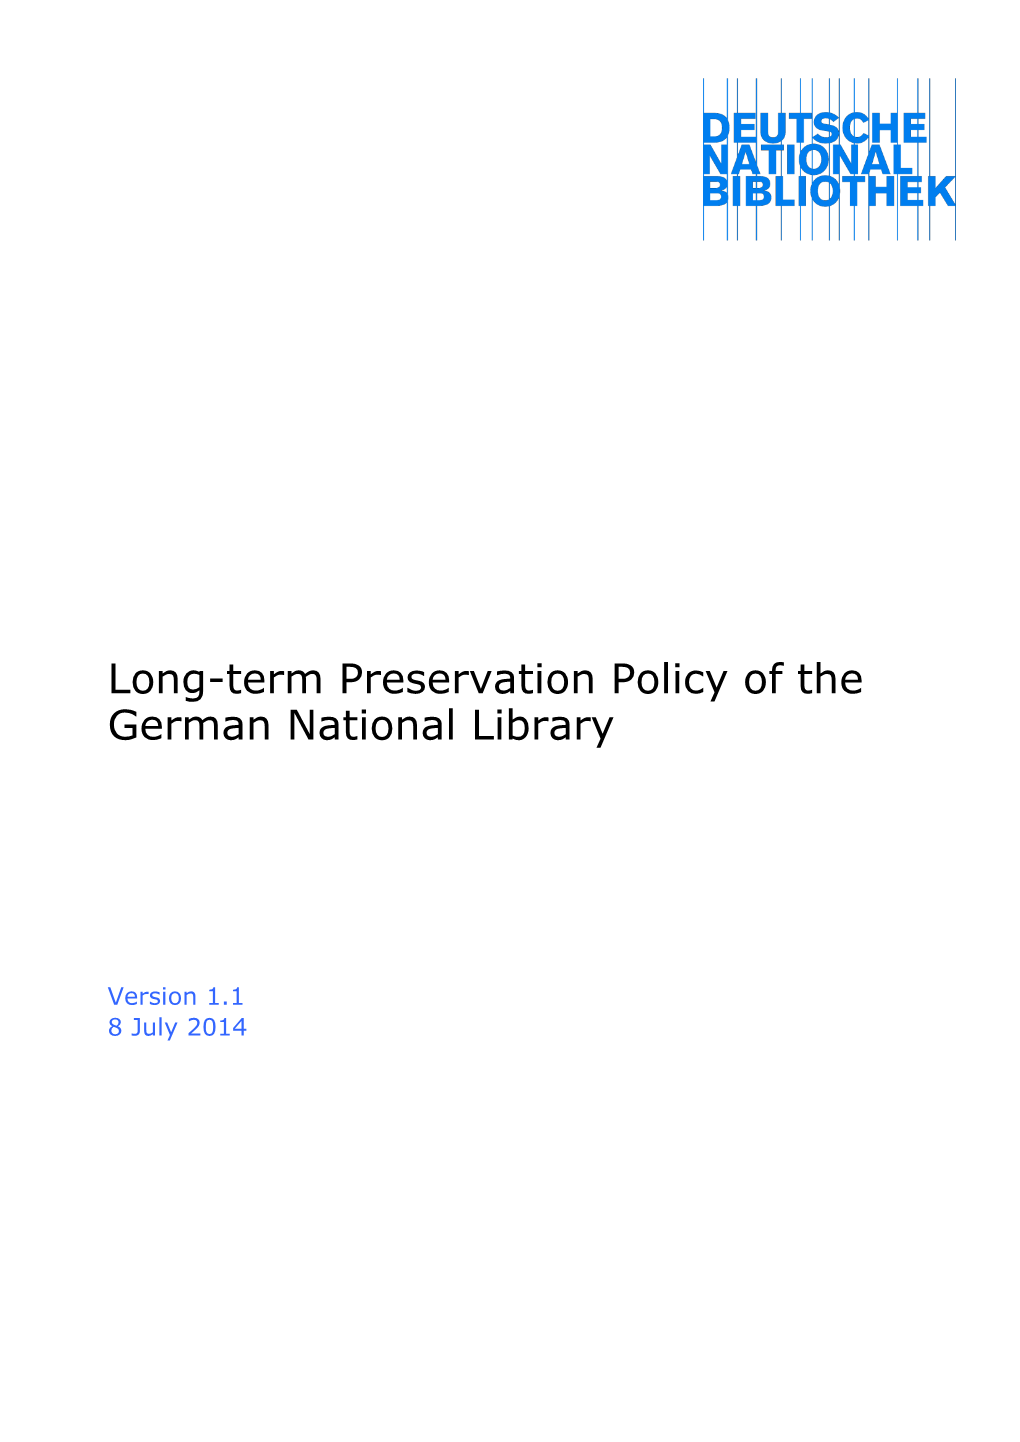 Long-Term Preservation Policy of the German National Library